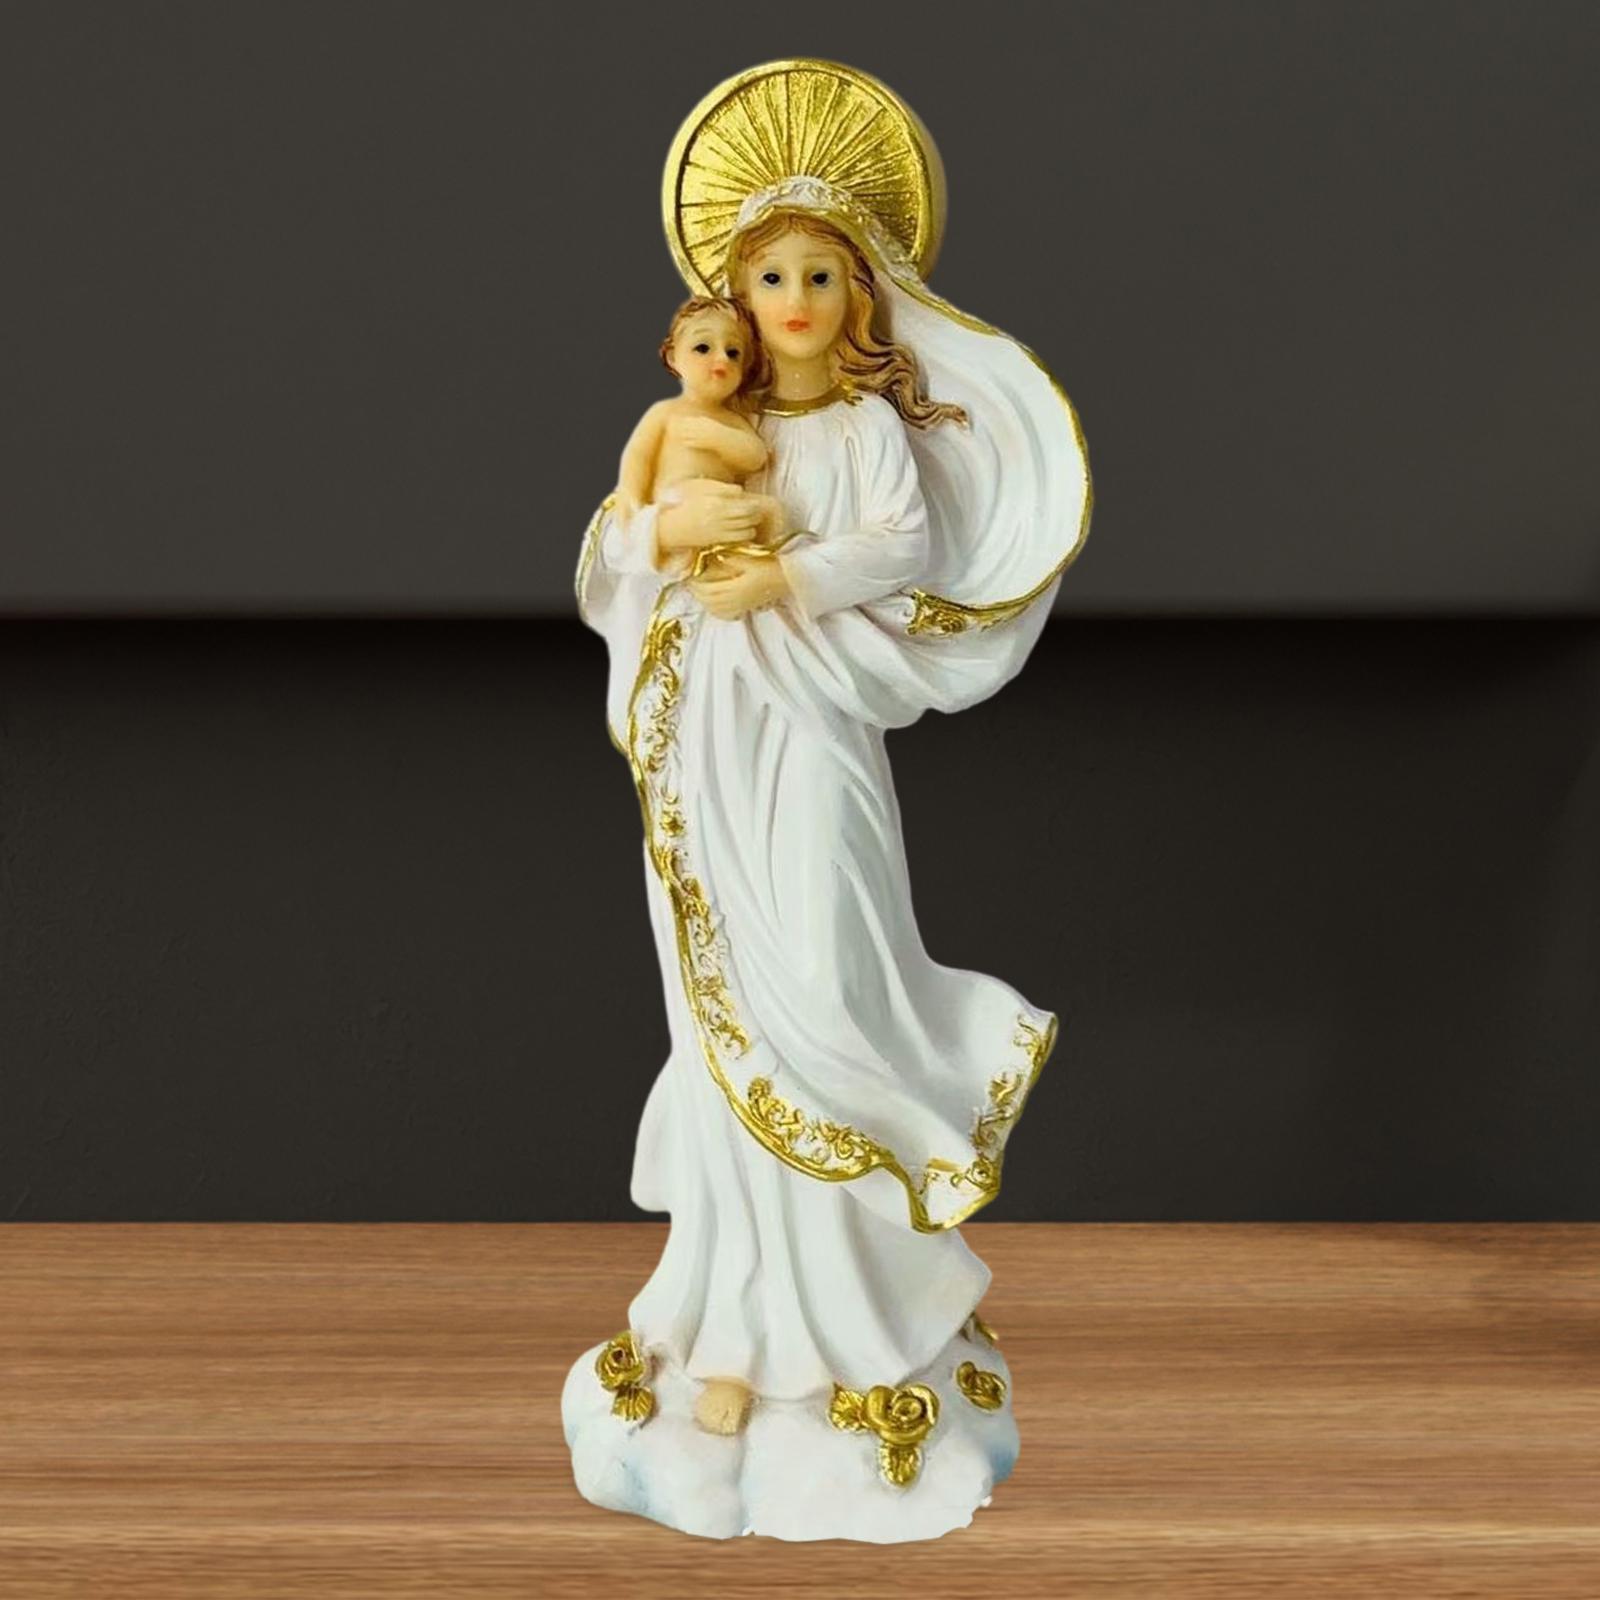 Blessed Mother and Child Jesus Figurine Crafts for Home Tabletop Living Room